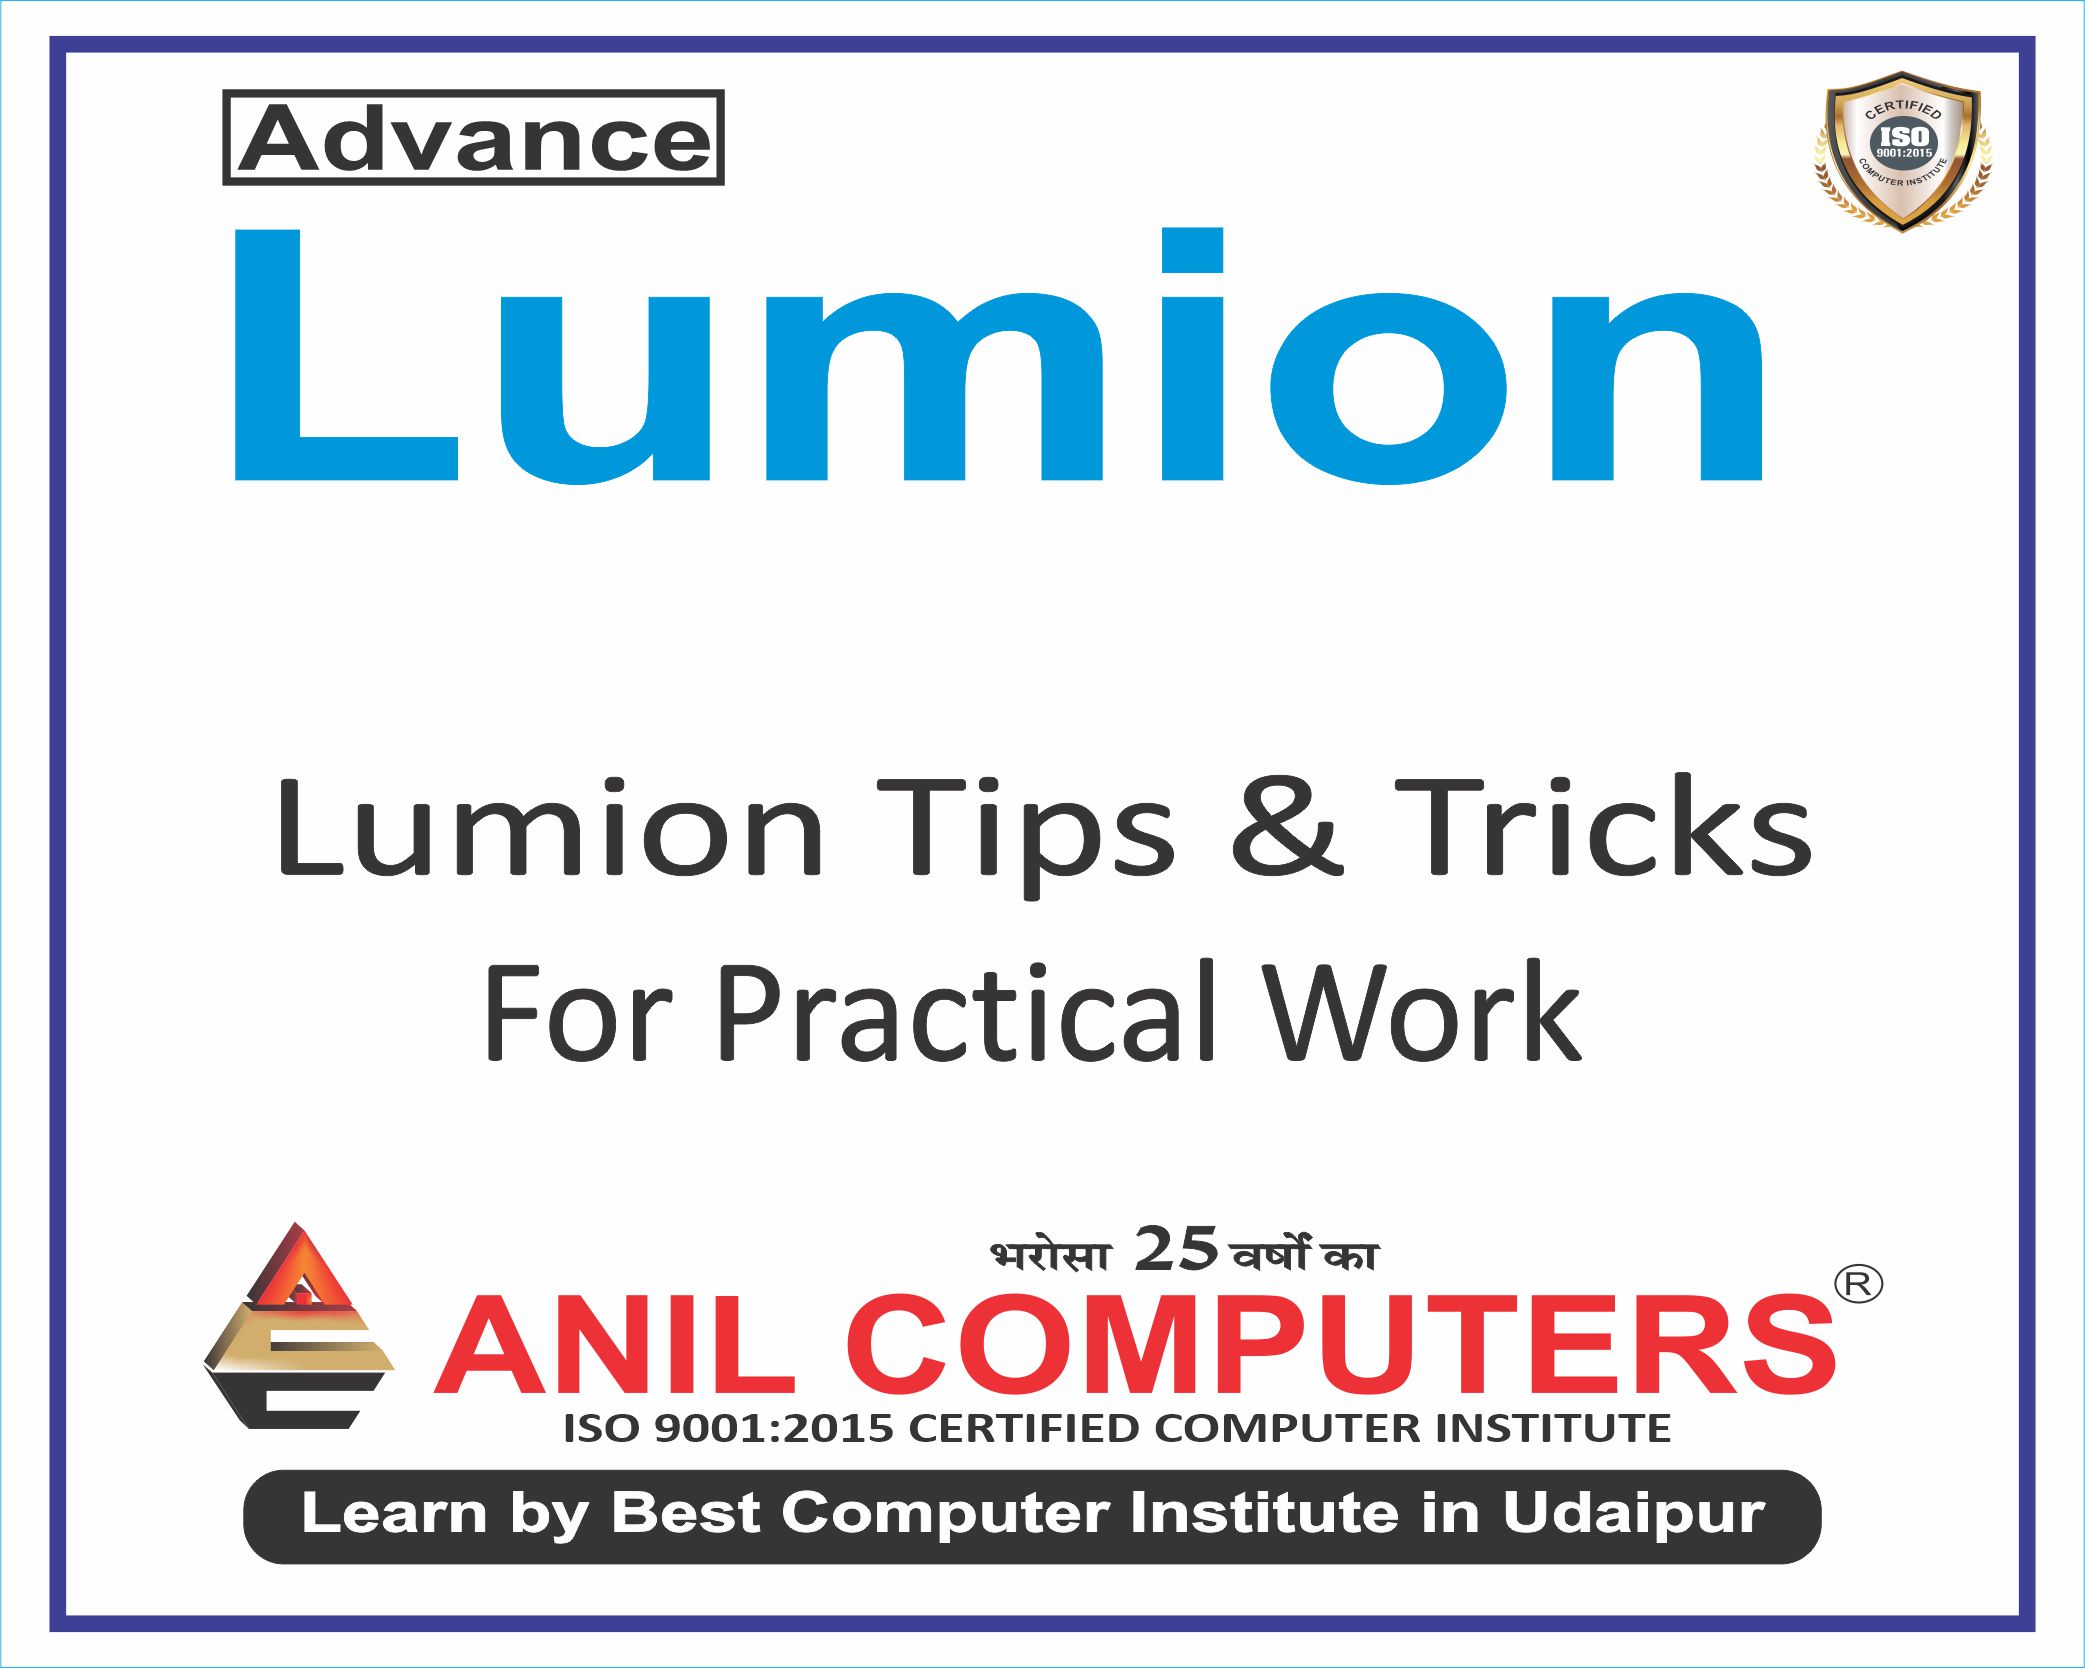 Lumion Tips & Tricks For Practical Work